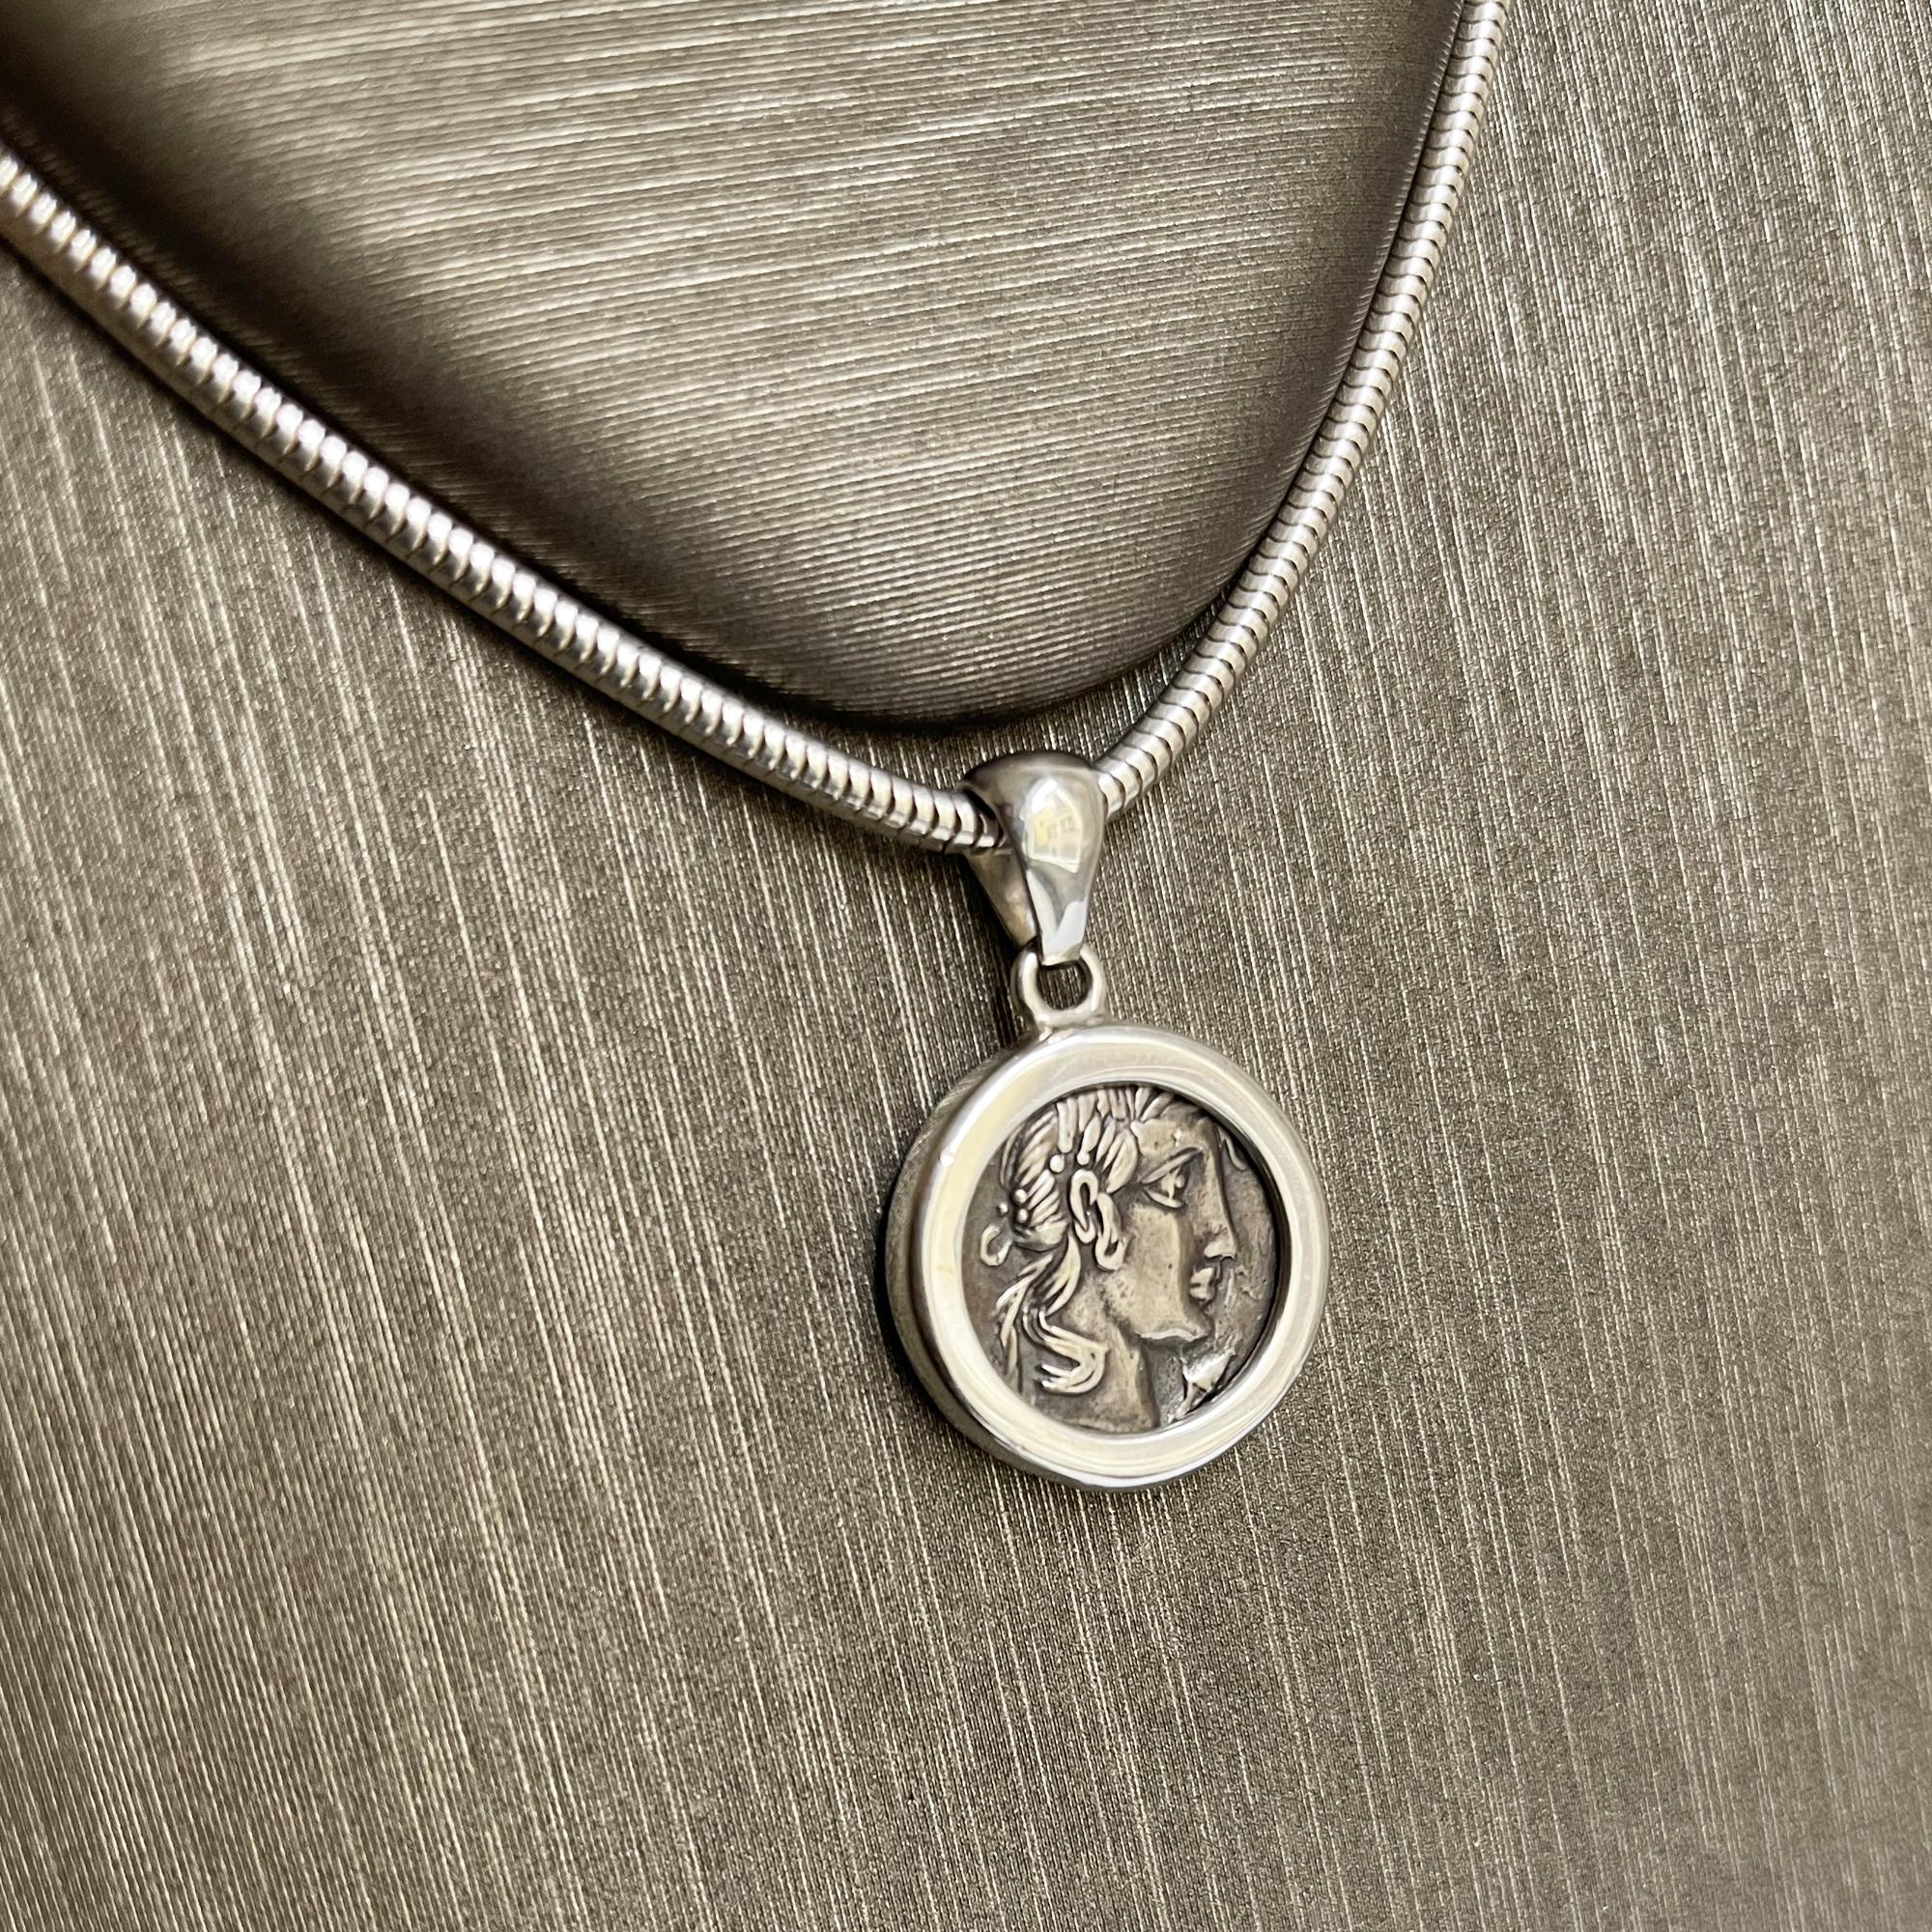 This sterling silver pendant has been set with an authentic 1st century BC Roman coin depicting the god Apollo. The contemporary setting was made by our goldsmiths. The silver coin, set in the center, authentic Roman, was minted in 48 BC by Vibio